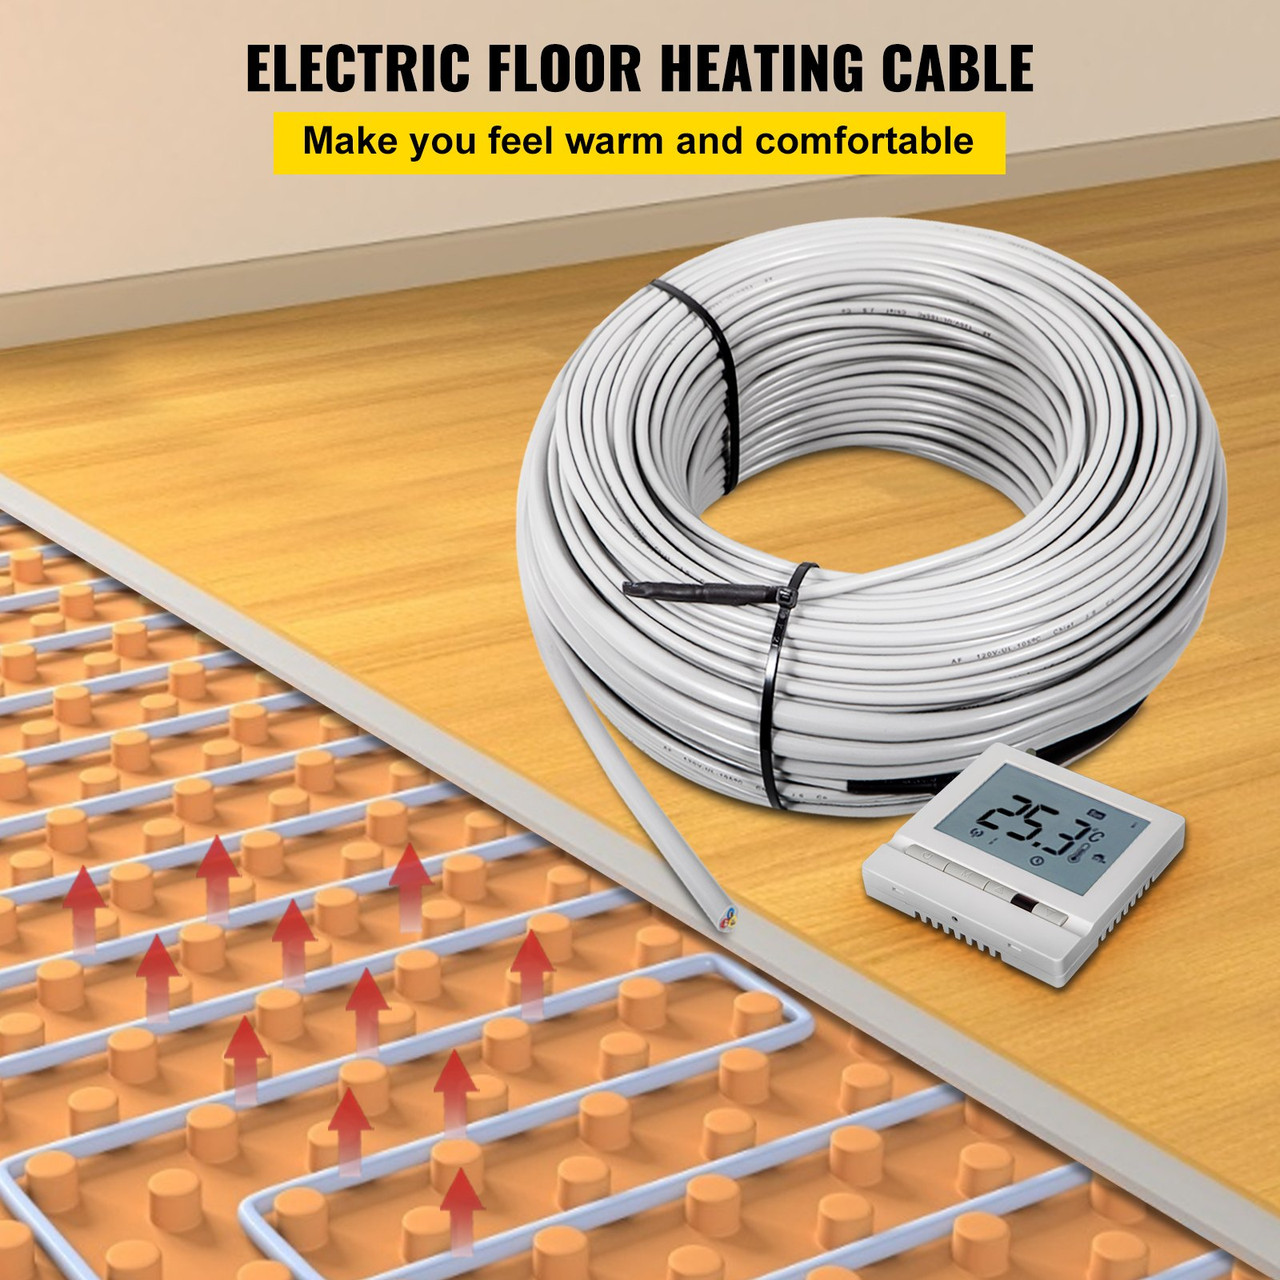 Ditra Floor Heating Cable,1630W 240V Floor Tile Heat Cable,425.8 FT Long,128.8 sqft,with Convenient Temperature Control Panel,No Noise or Radiation